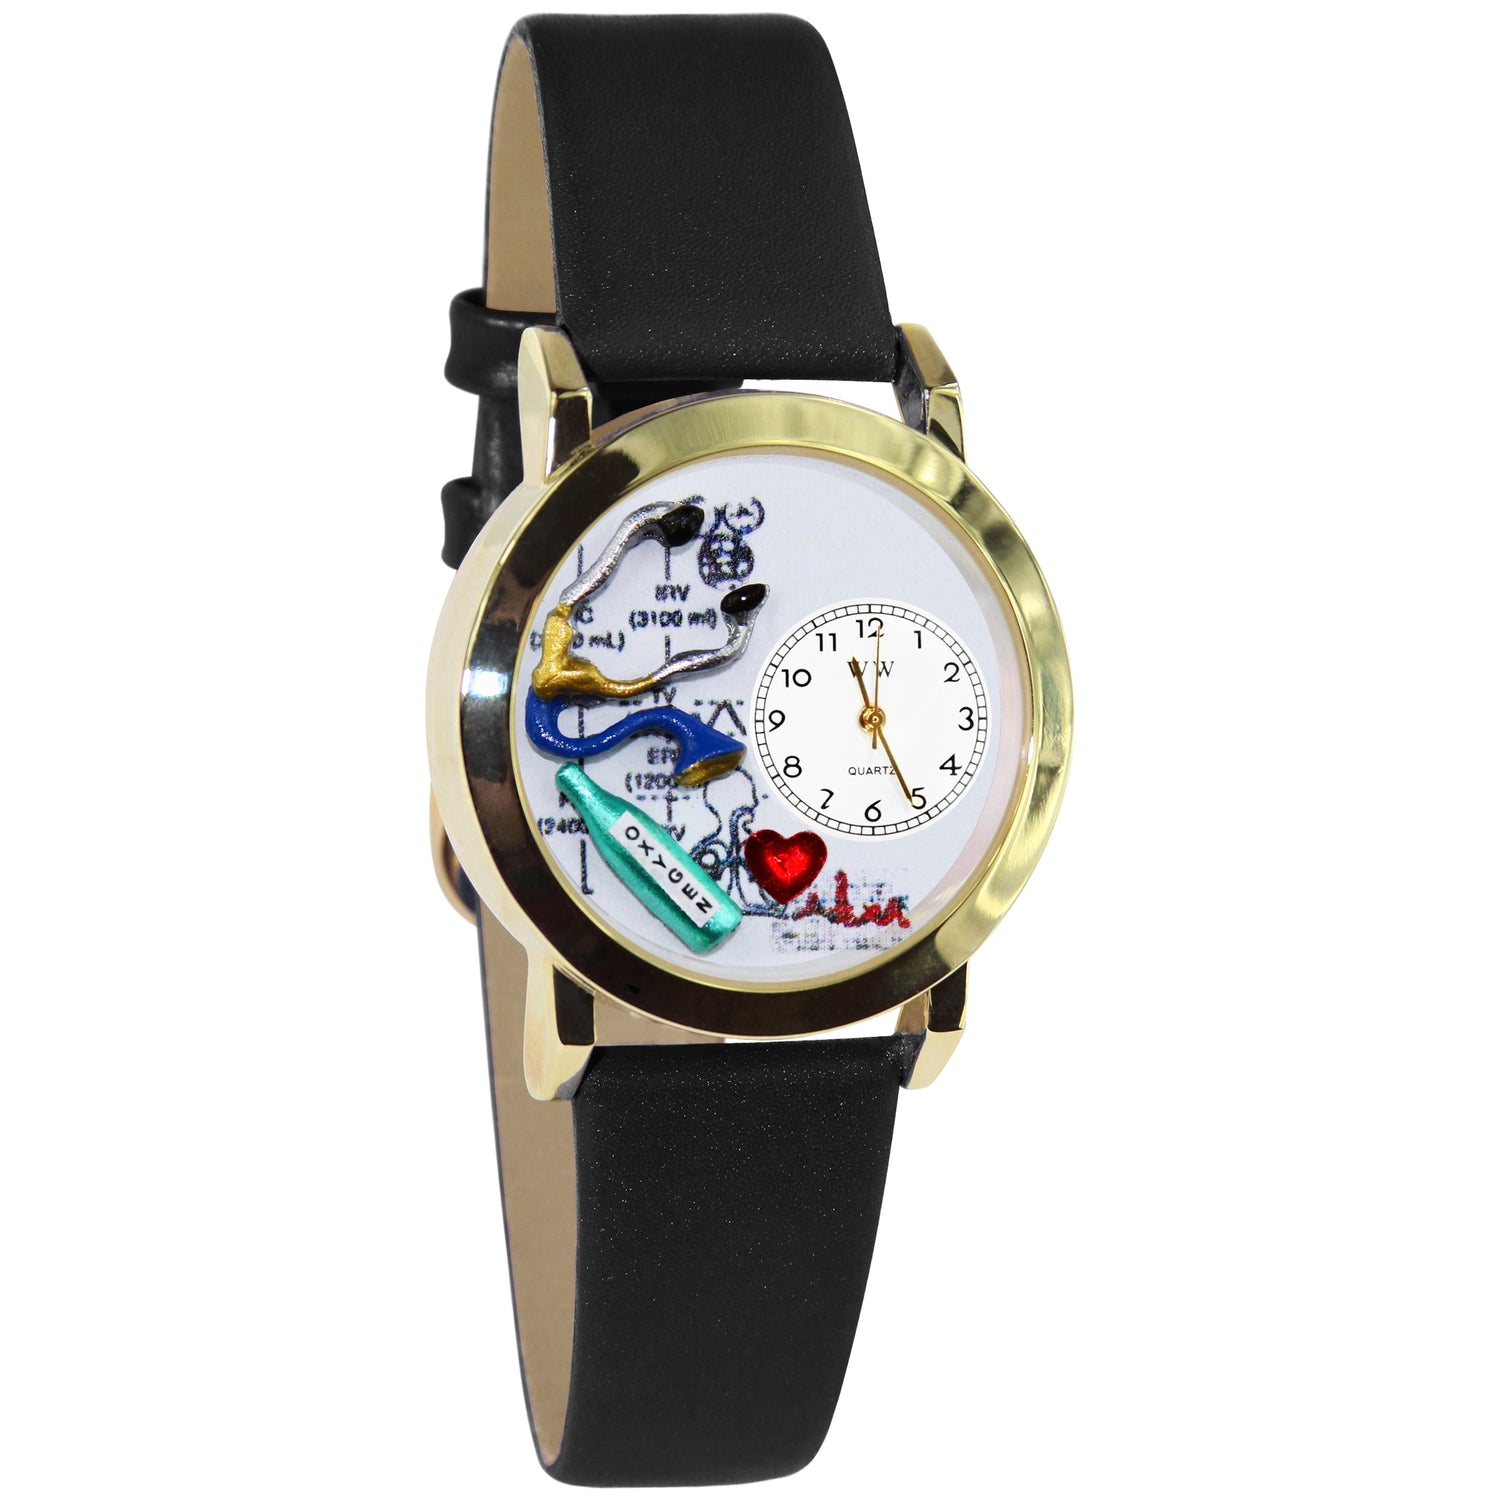 Whimsical Gifts | Respiratory Therapist 3D Watch Small Style | Handmade in USA | Professions Themed | Medical Professions | Novelty Unique Fun Miniatures Gift | Gold Finish Black Leather Watch Band